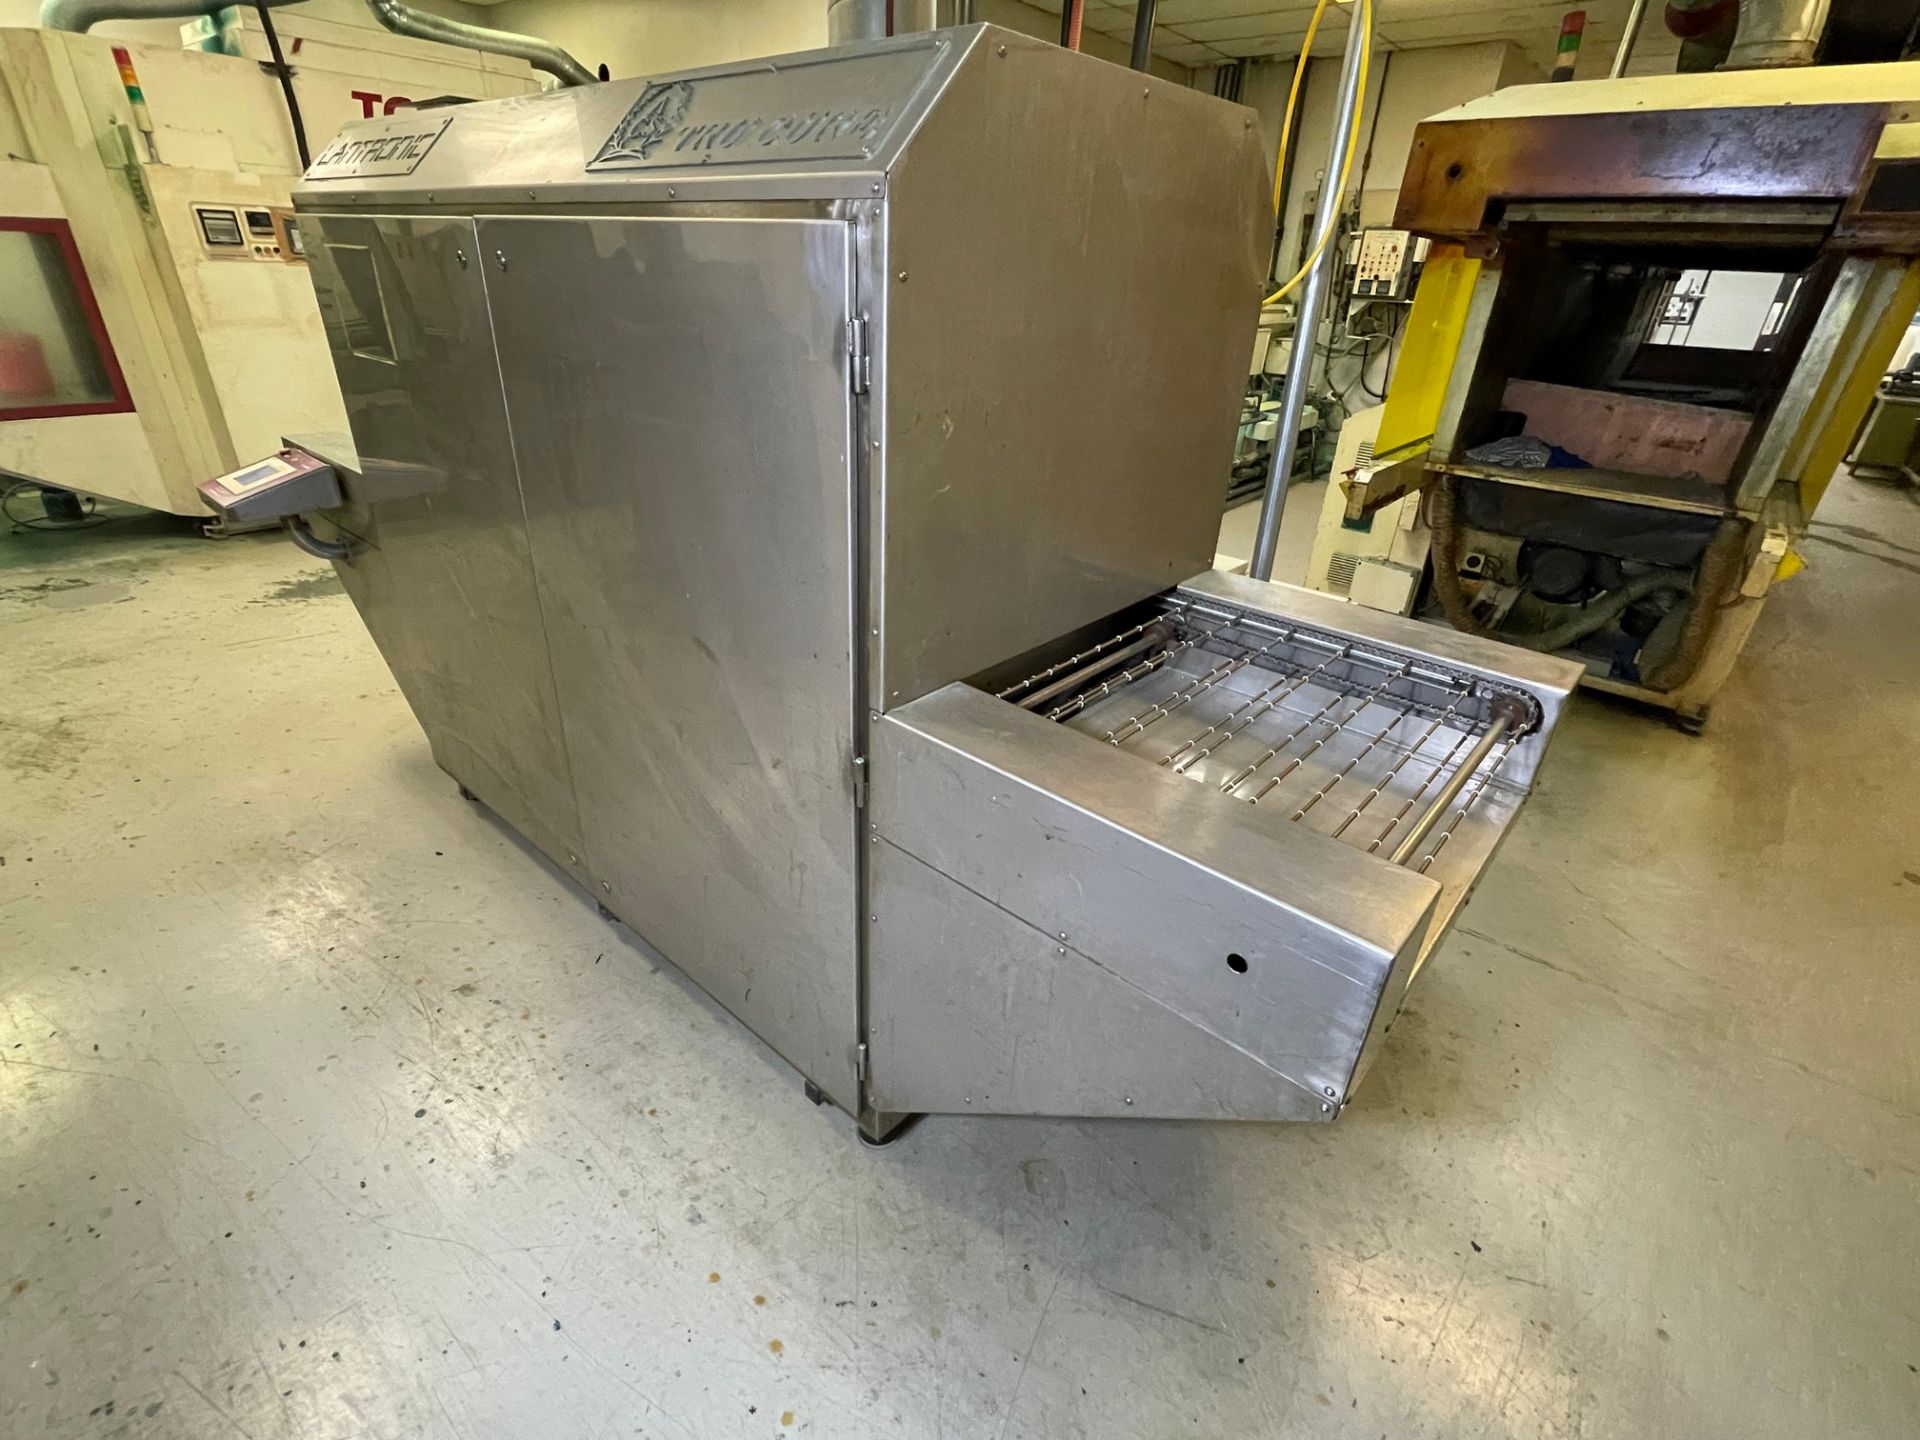 2006 LANTRONIC MODEL TC243 CURING OVEN W/ SIEMENS QUICK PANEL JR. TOUCH SCREEN CONTROL - Image 6 of 16